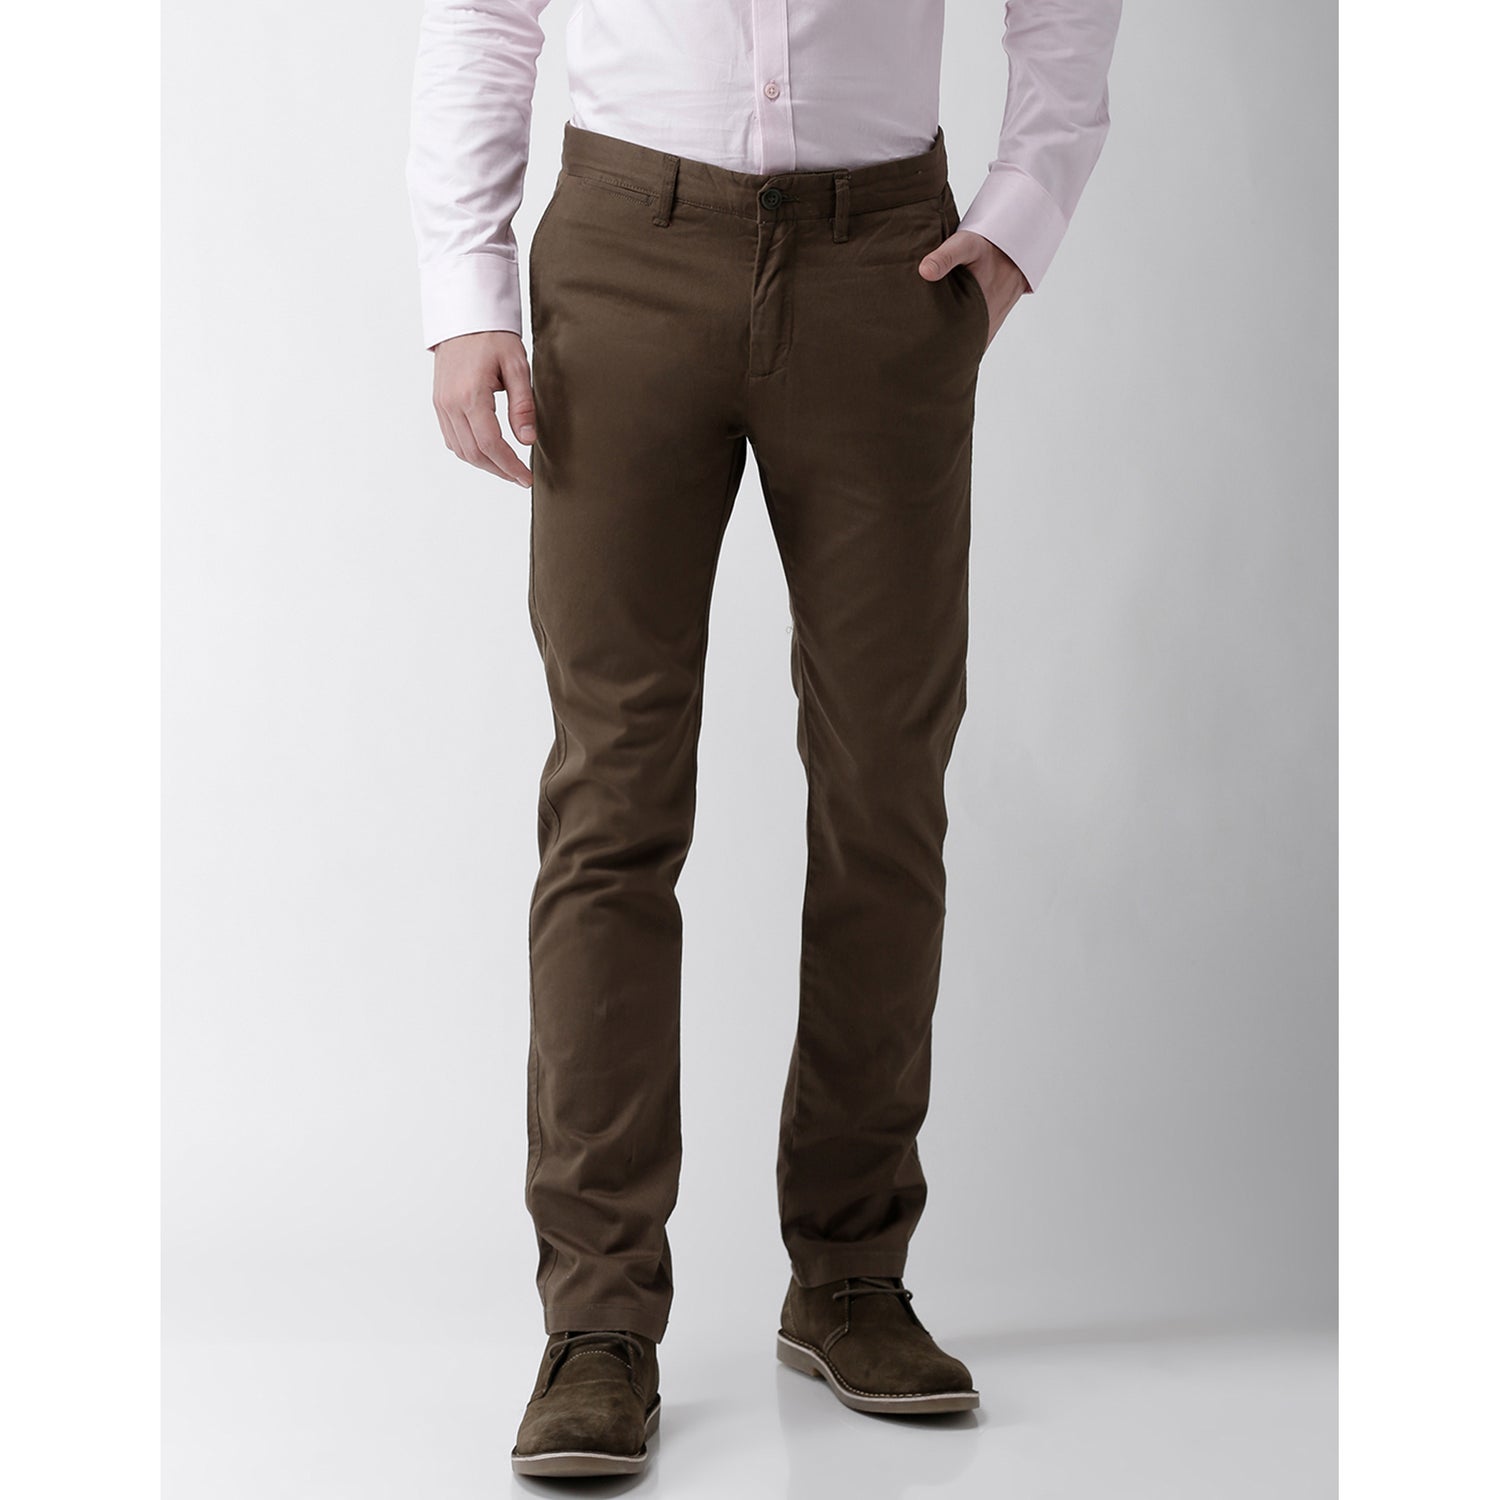 Olive Green Solid Slim Fit Regular Trousers (MOPRIMAI)